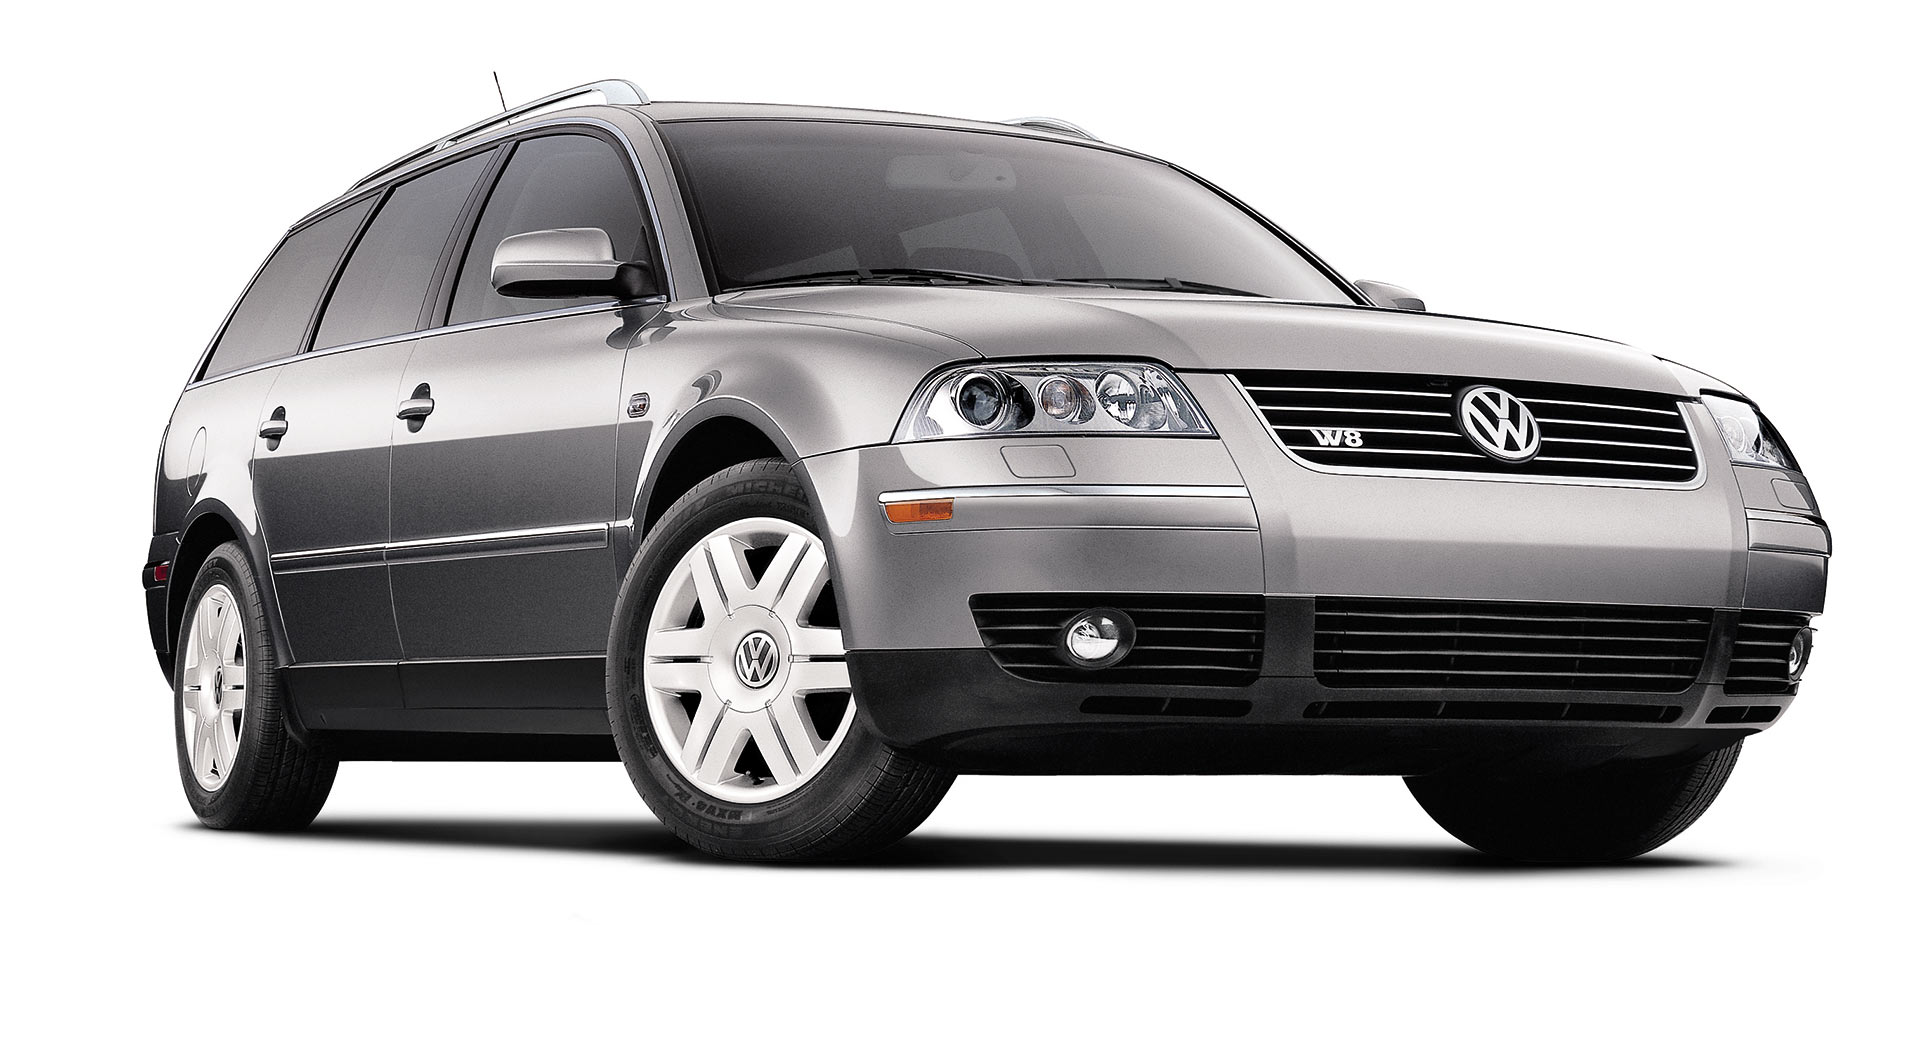 The Volkswagen Passat W8 Was A 275 HP Family Sedan With A Rather Unusual  Engine | Carscoops